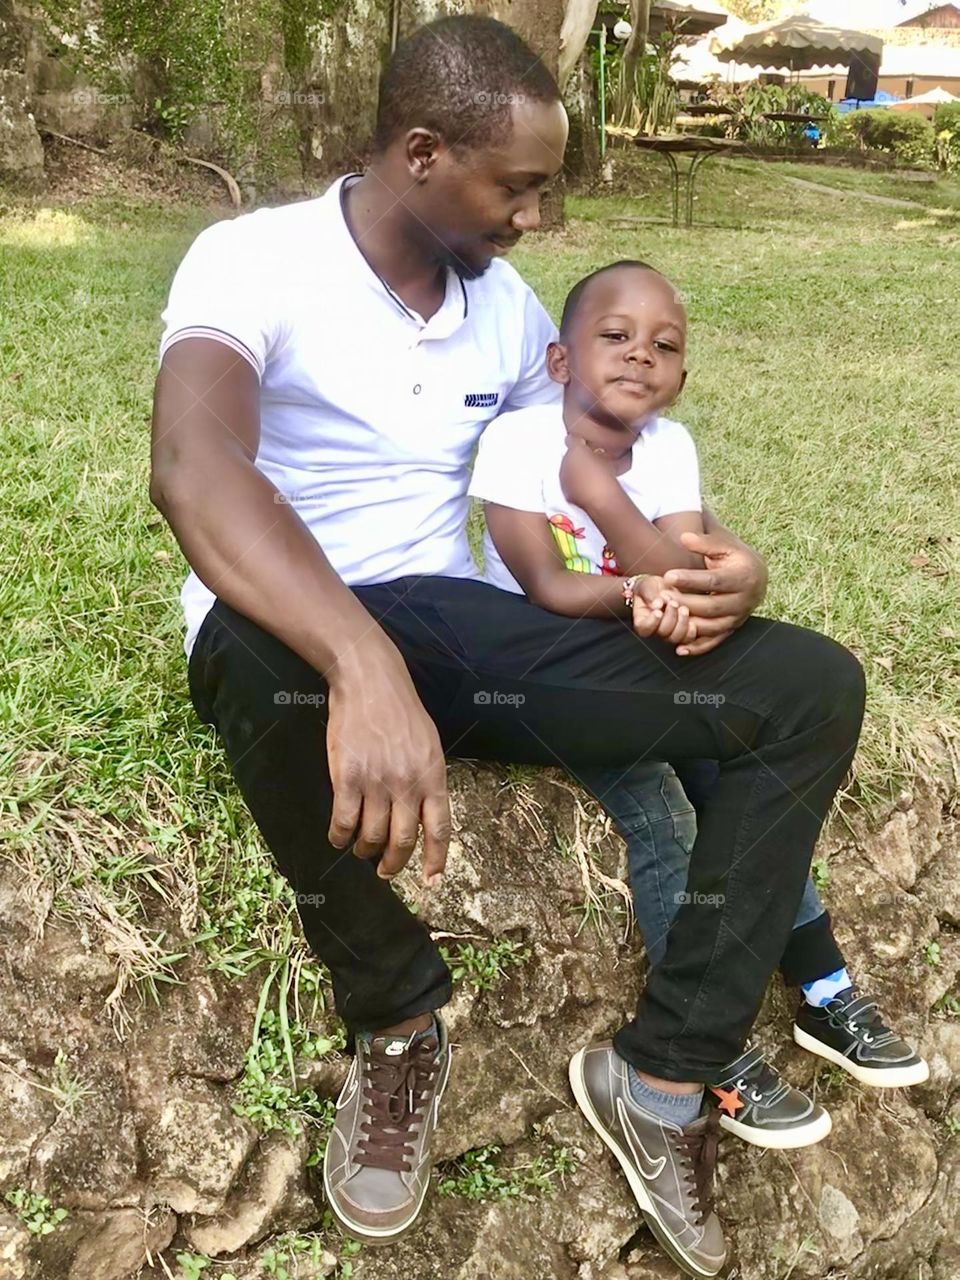 real people full length Sitting Males men casual clothing young men bonding day togetherness young adult mid adult men Love lifestyles leisure activity father family with one child Plant positive emotion outdoors in Thika , Kenya